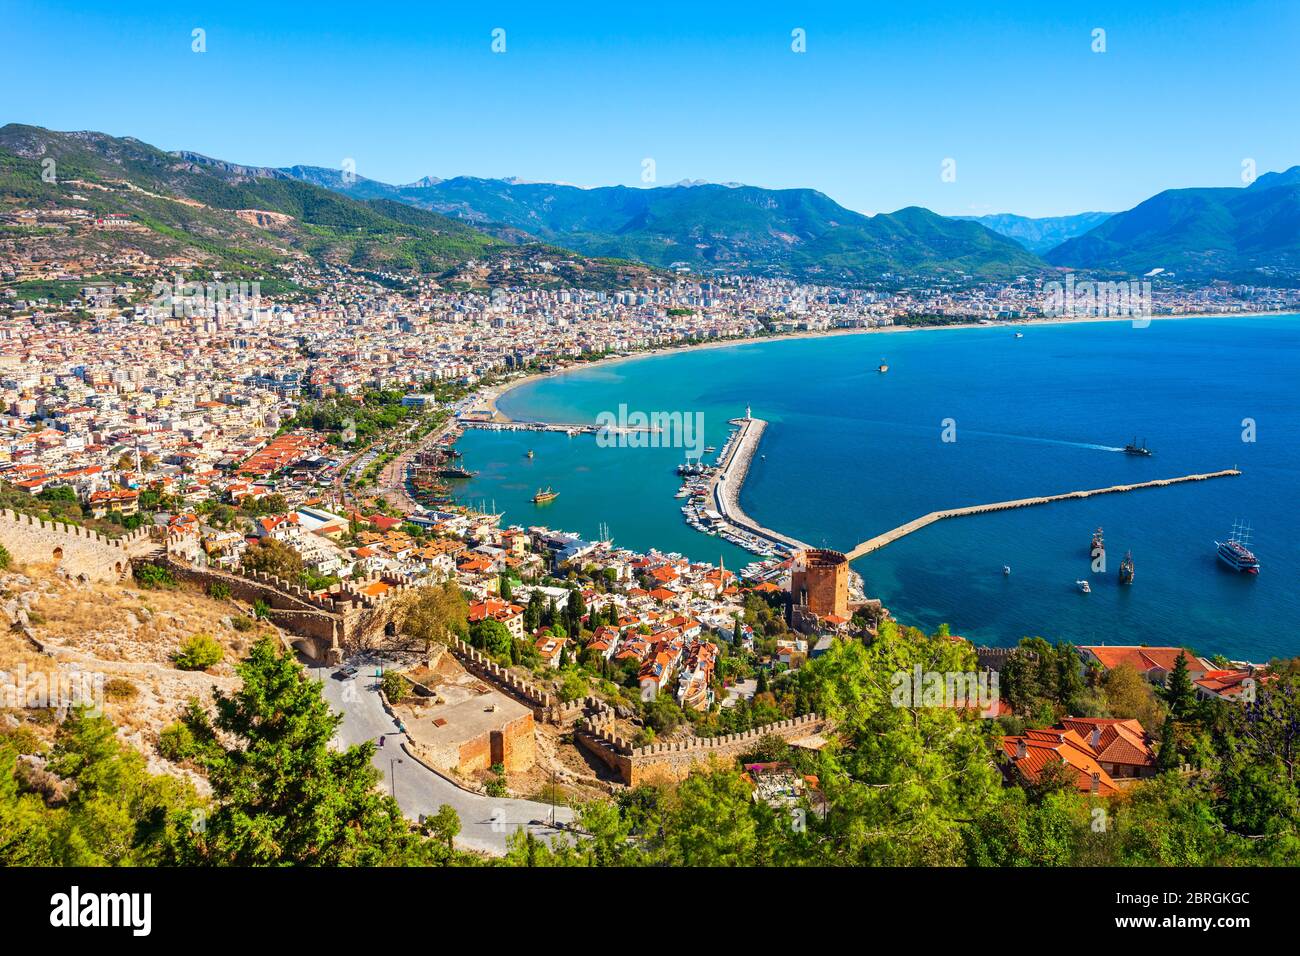 Kizil Kule Red Tower, Alanya castle and port aerial panoramic view in Alanya city, Antalya Province on the southern coast of Turkey Stock Photo